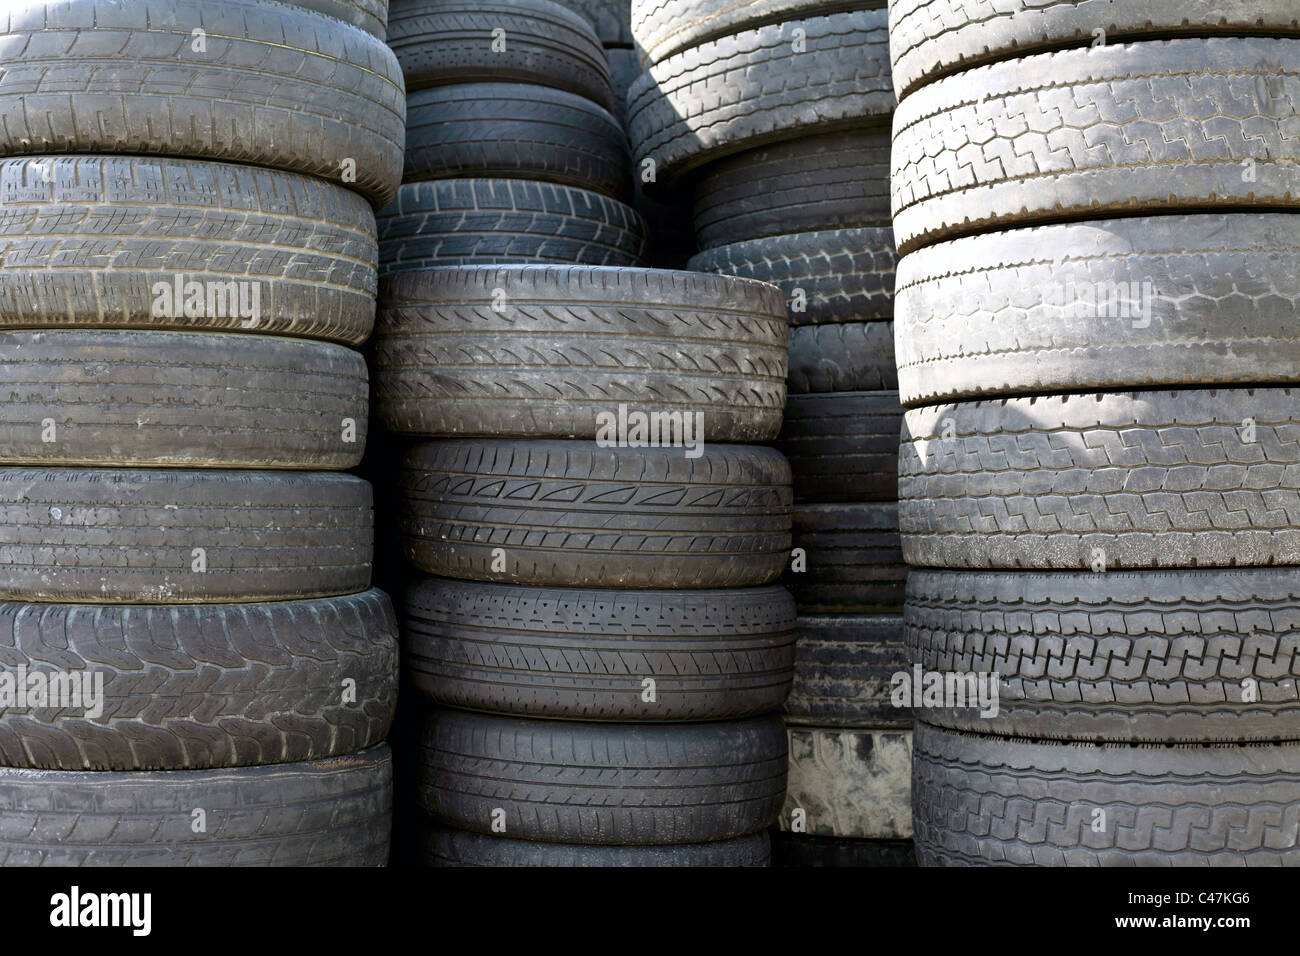 Pile of old tires for recycling Stock Photo